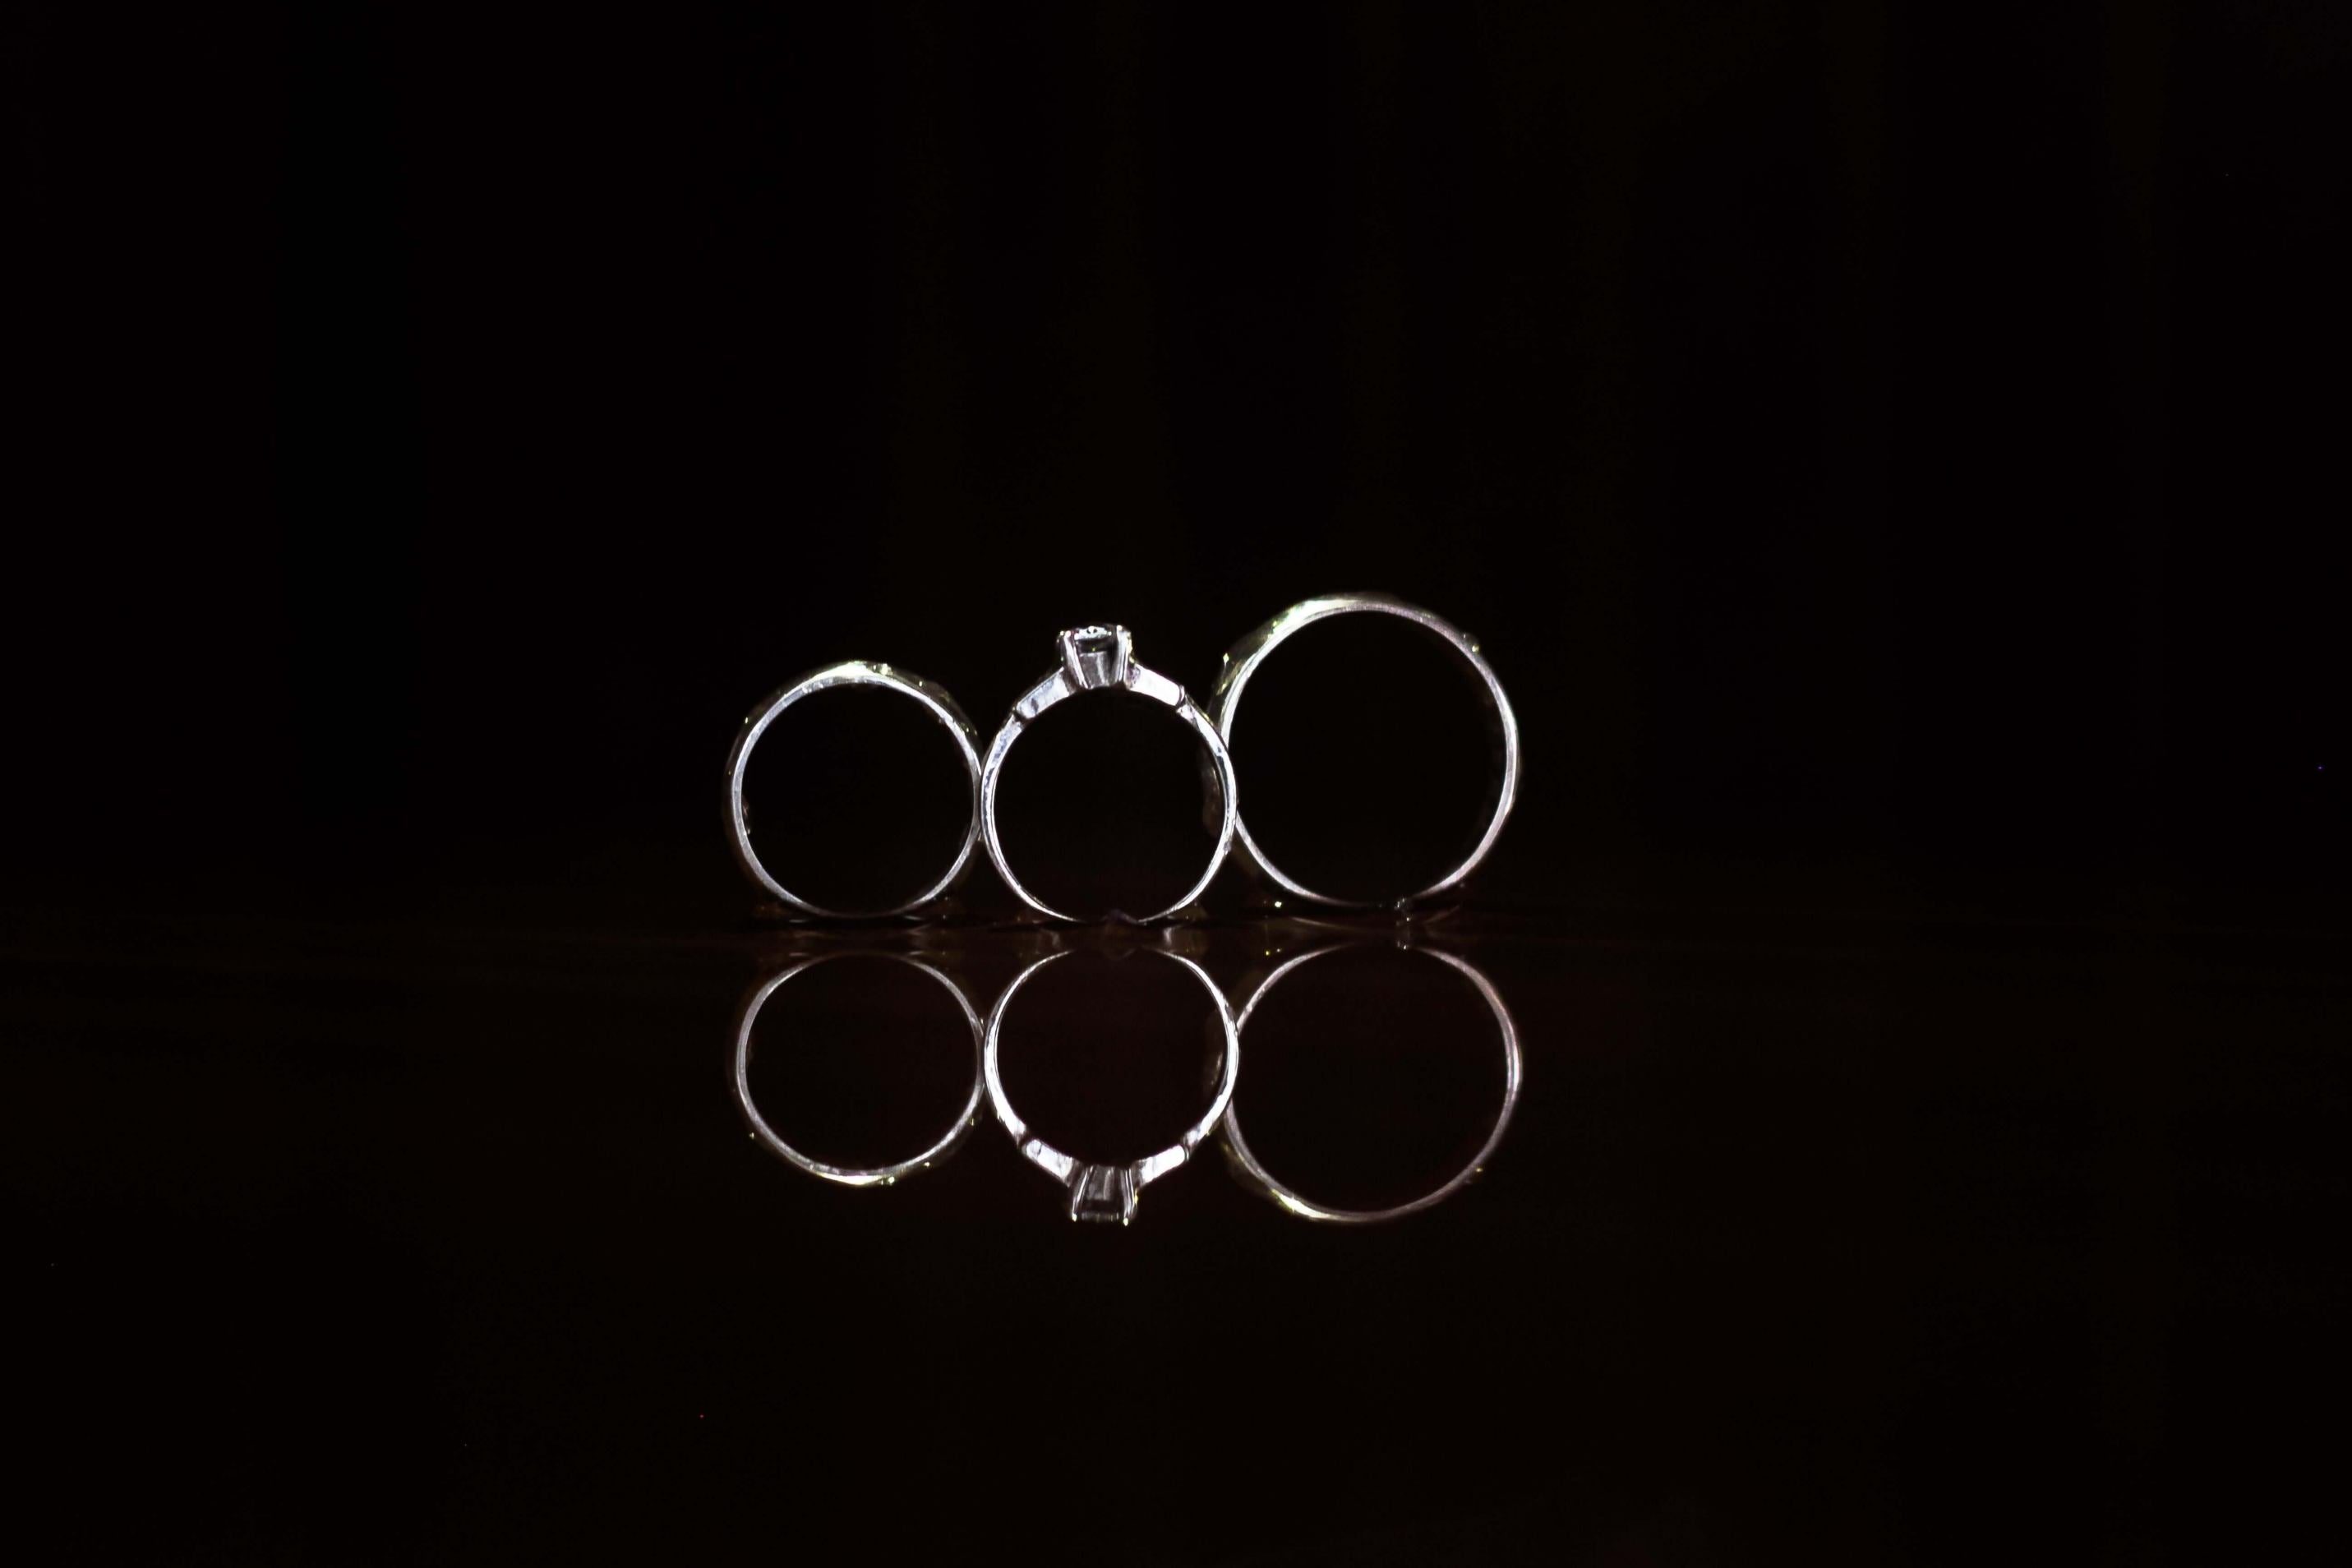 a row of silver rings standing up against a black background